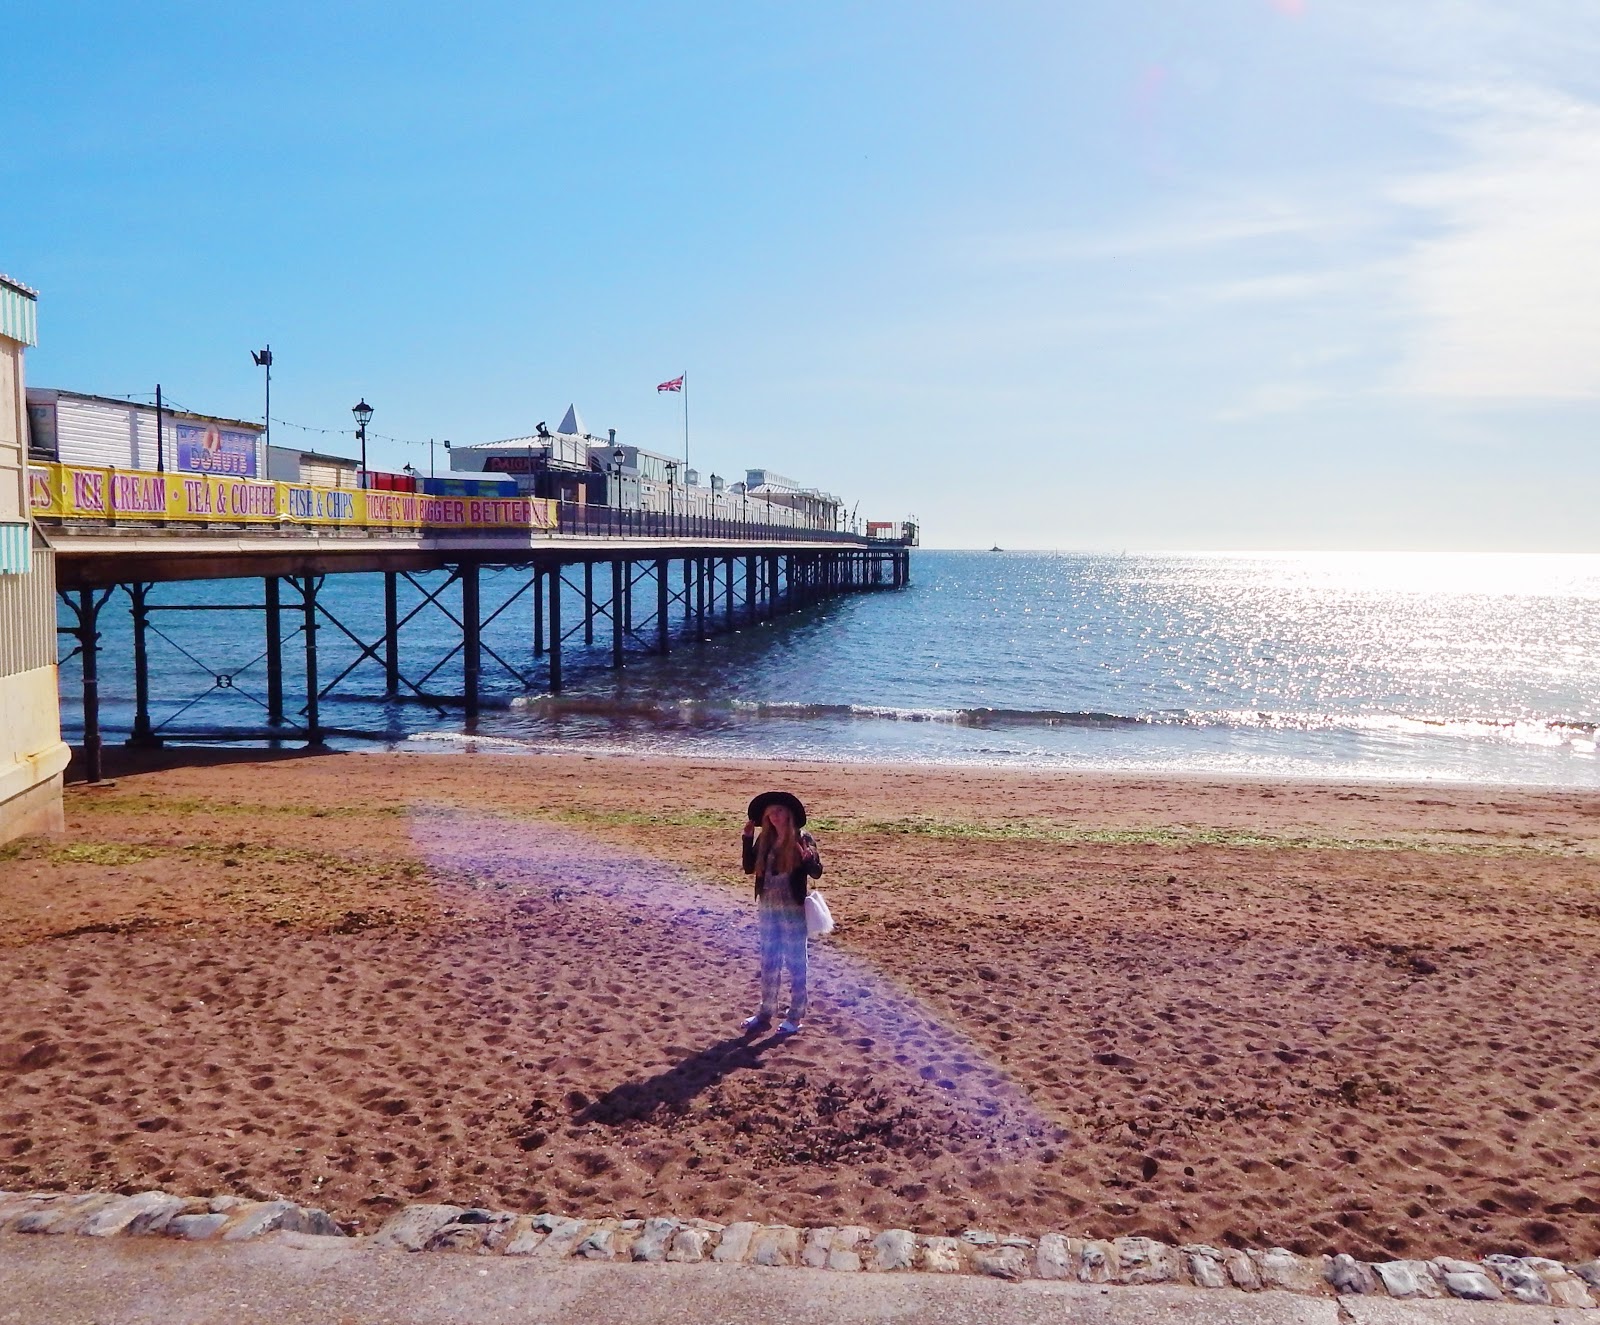 Dressed Down In The 70's at Paignton Pier - Part One